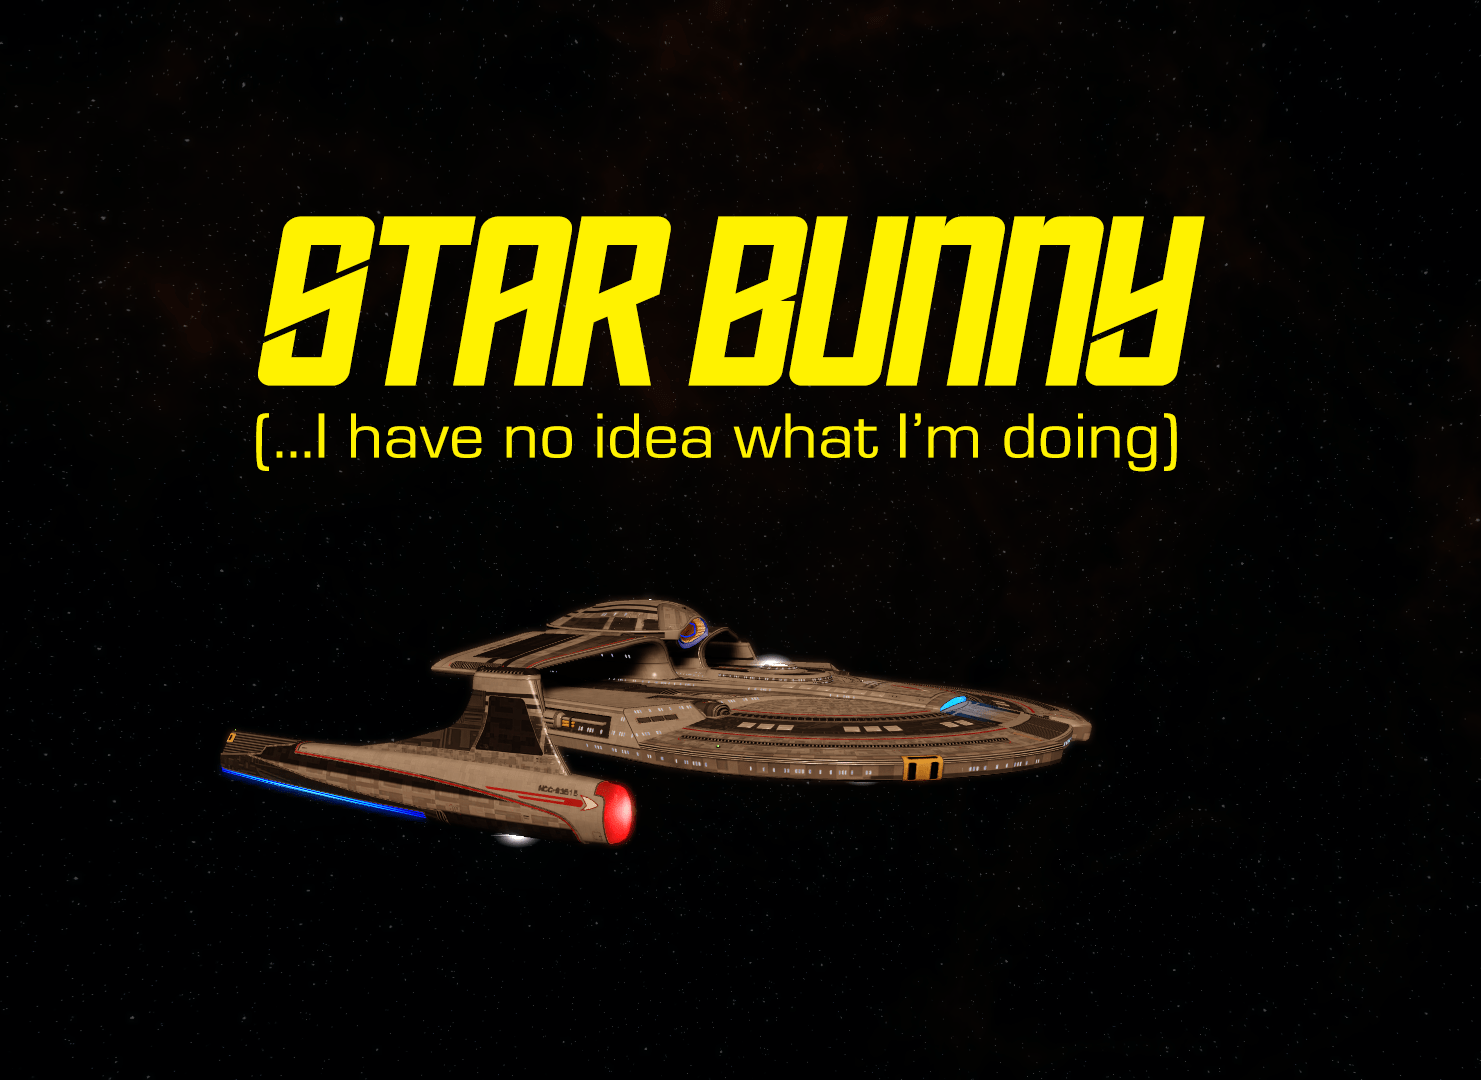 The first U.S.S. Astera, with the caption 'Star Bunny: (..I Have no Idea what I'm Doing)'